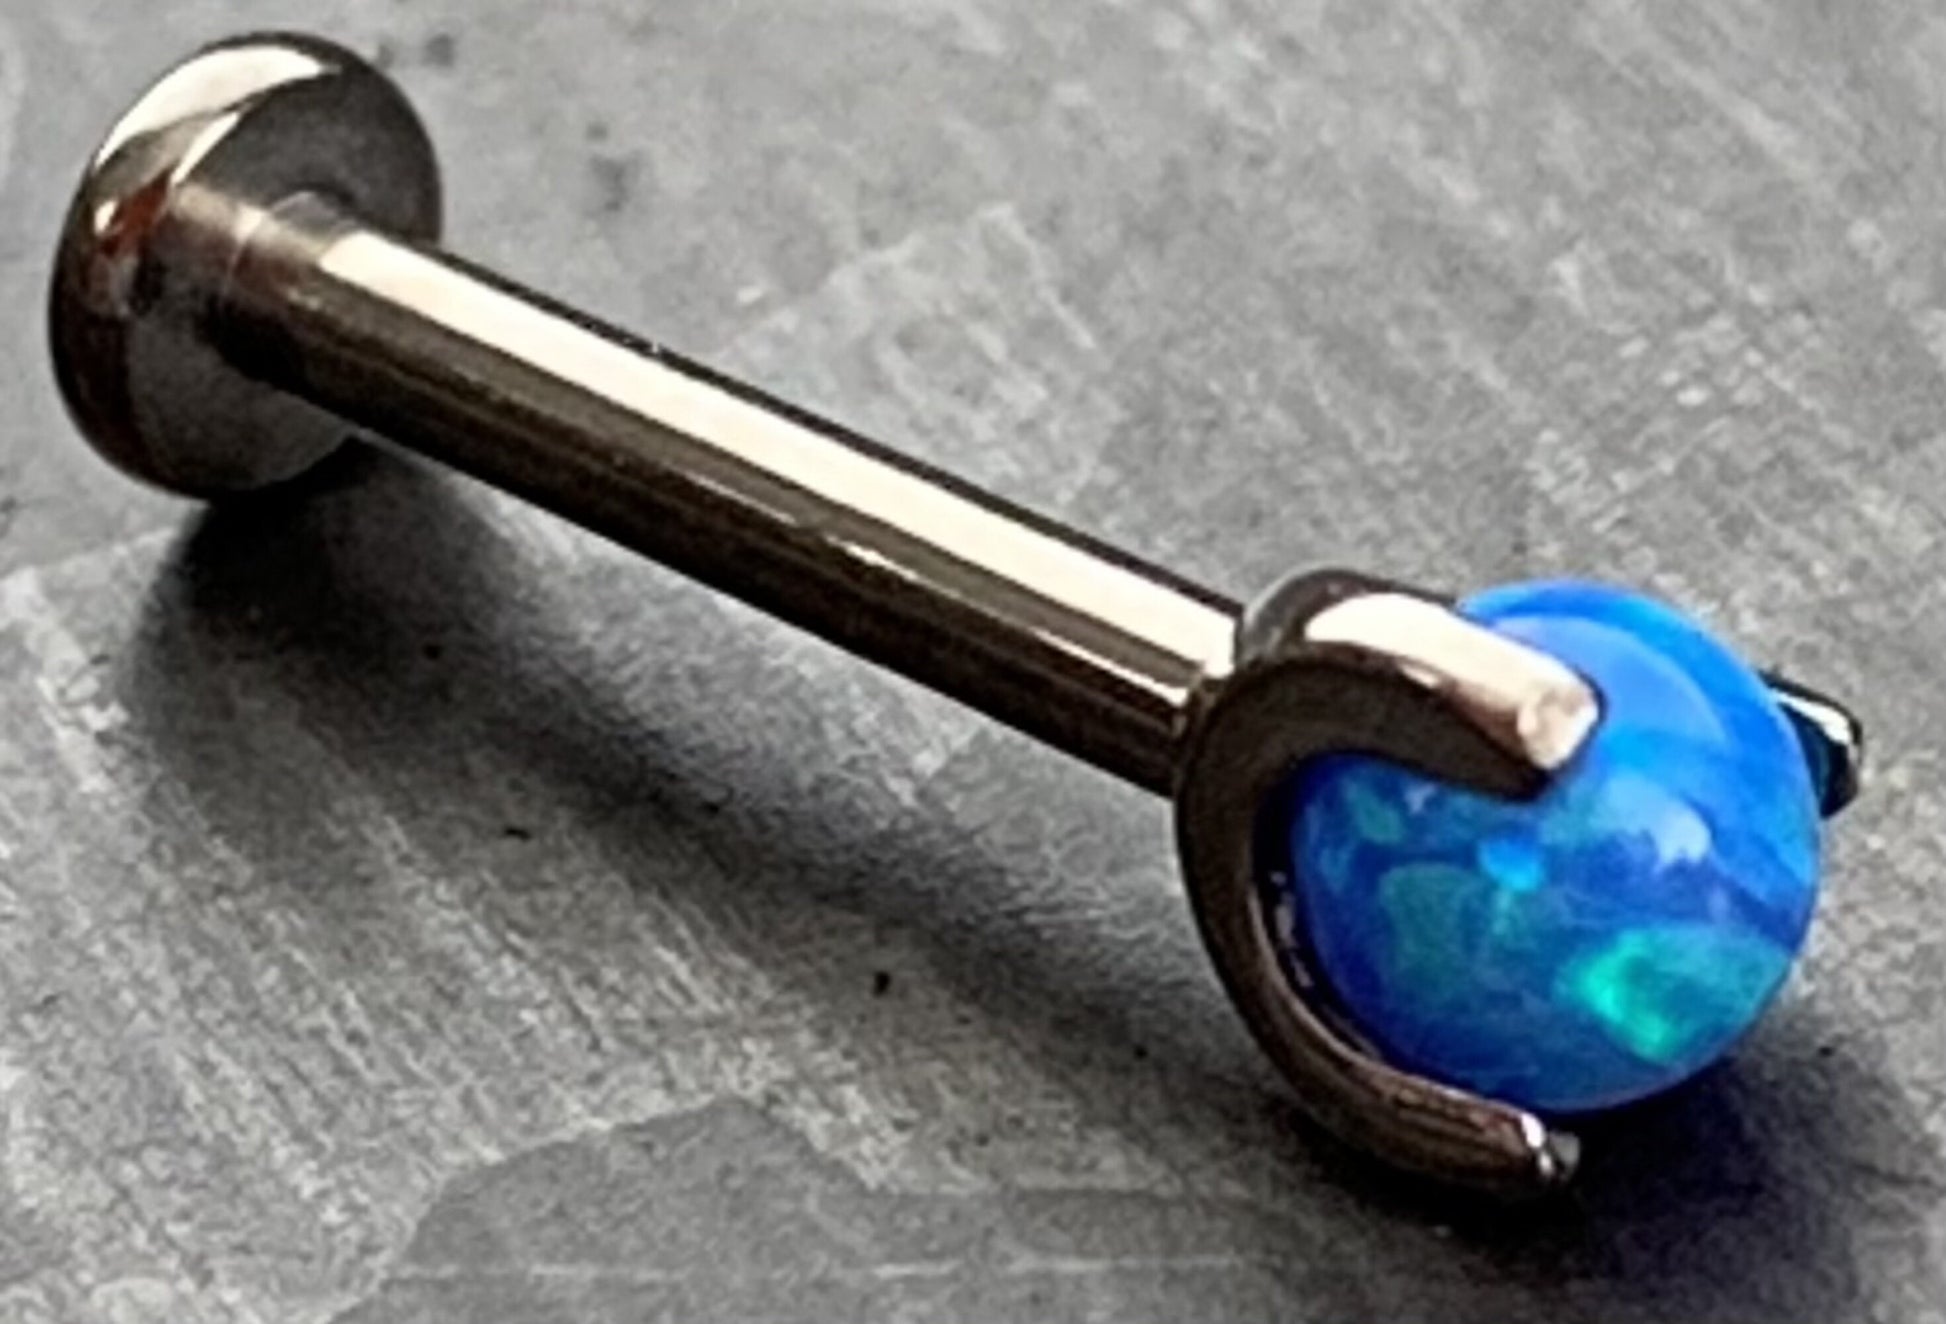 1 Piece Claw 3 Prong Opal Ball Titanium Labret-Monroe-Stud-Lip Ring-Helix Ear Cartilage - 16g - 5/8" (8mm) - Can be used for many piercings!